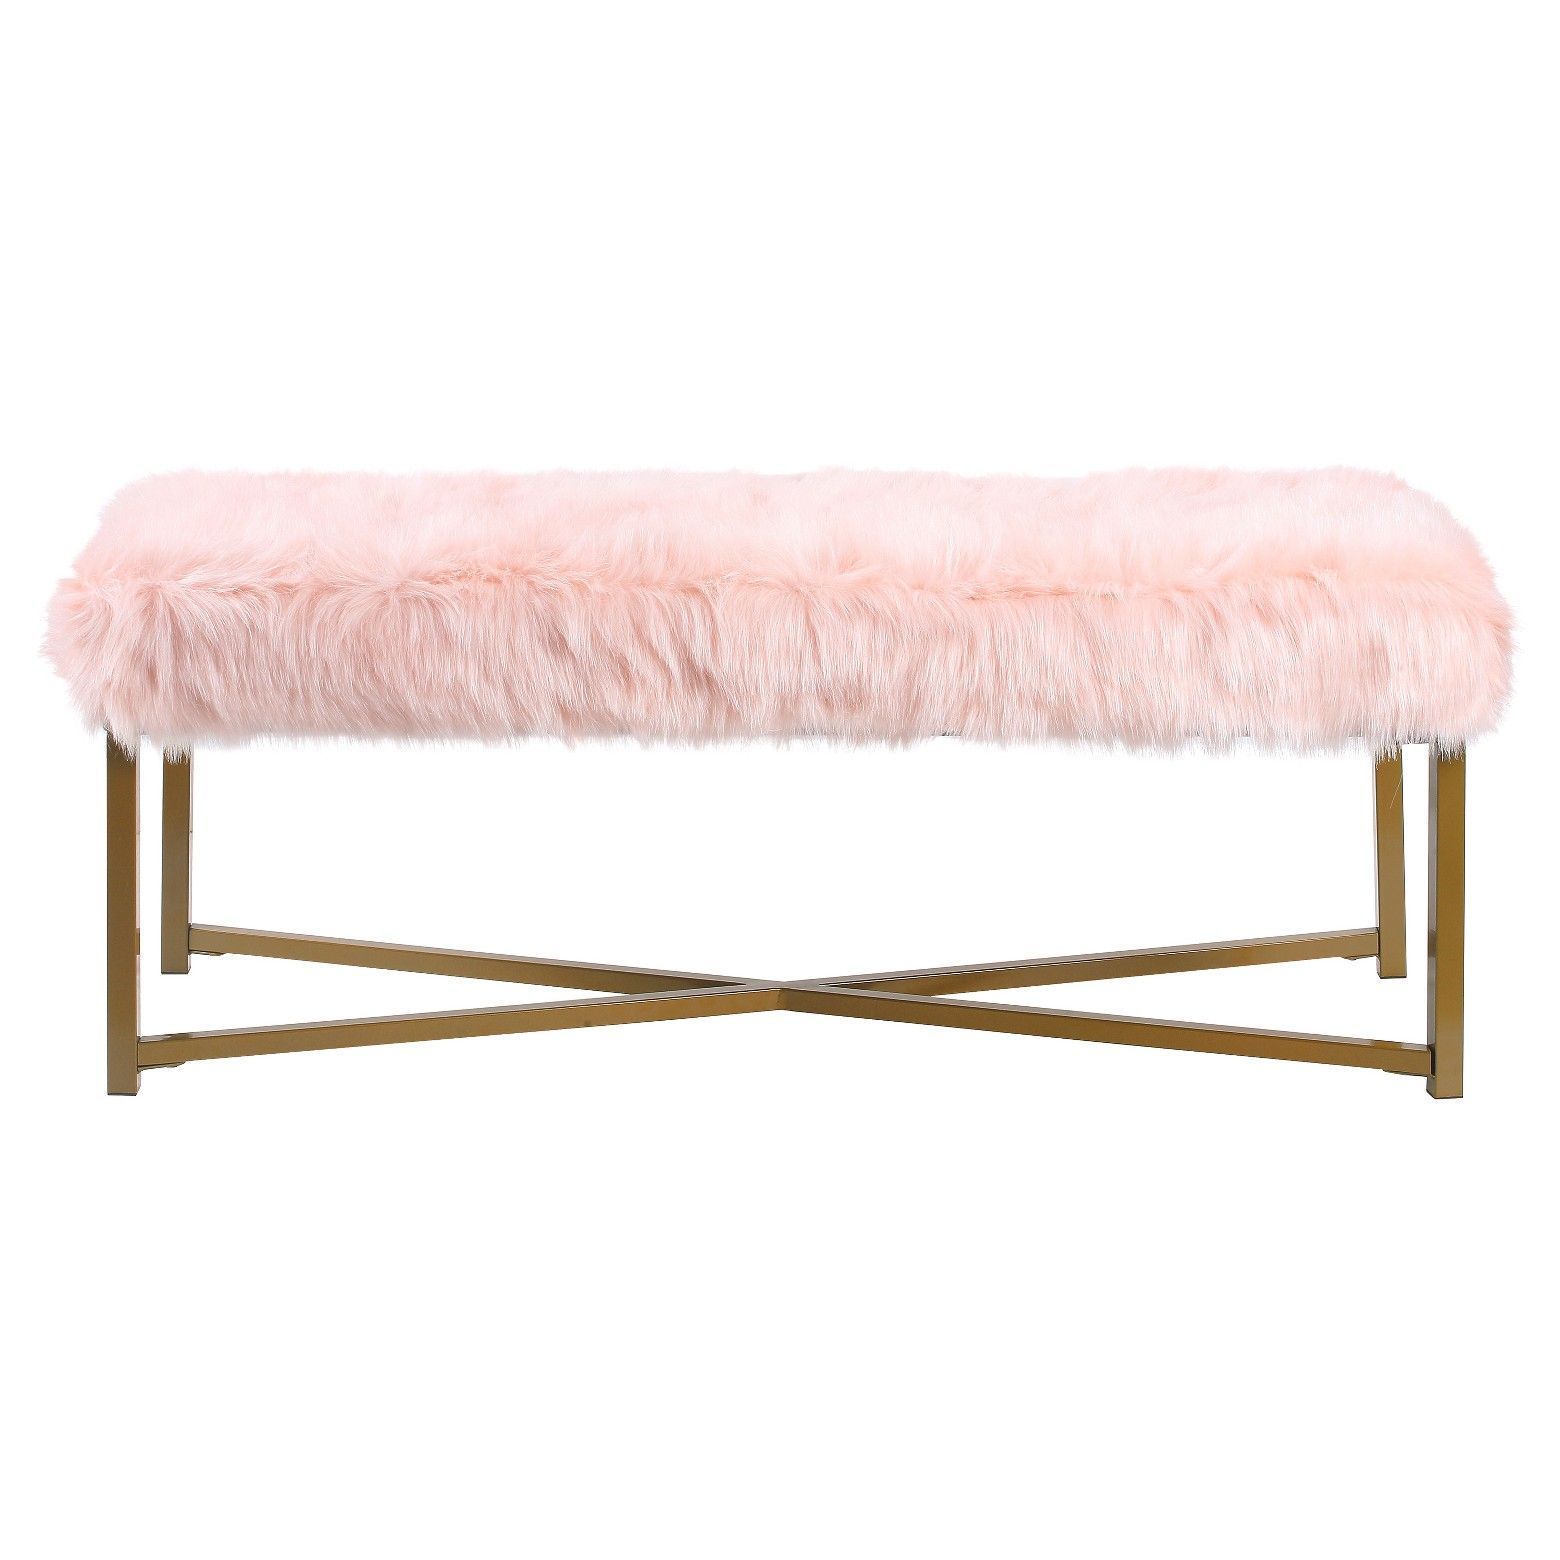 Faux Fur Rectangle Bench - Pink - HomePop -   16 fitness room pink
 ideas